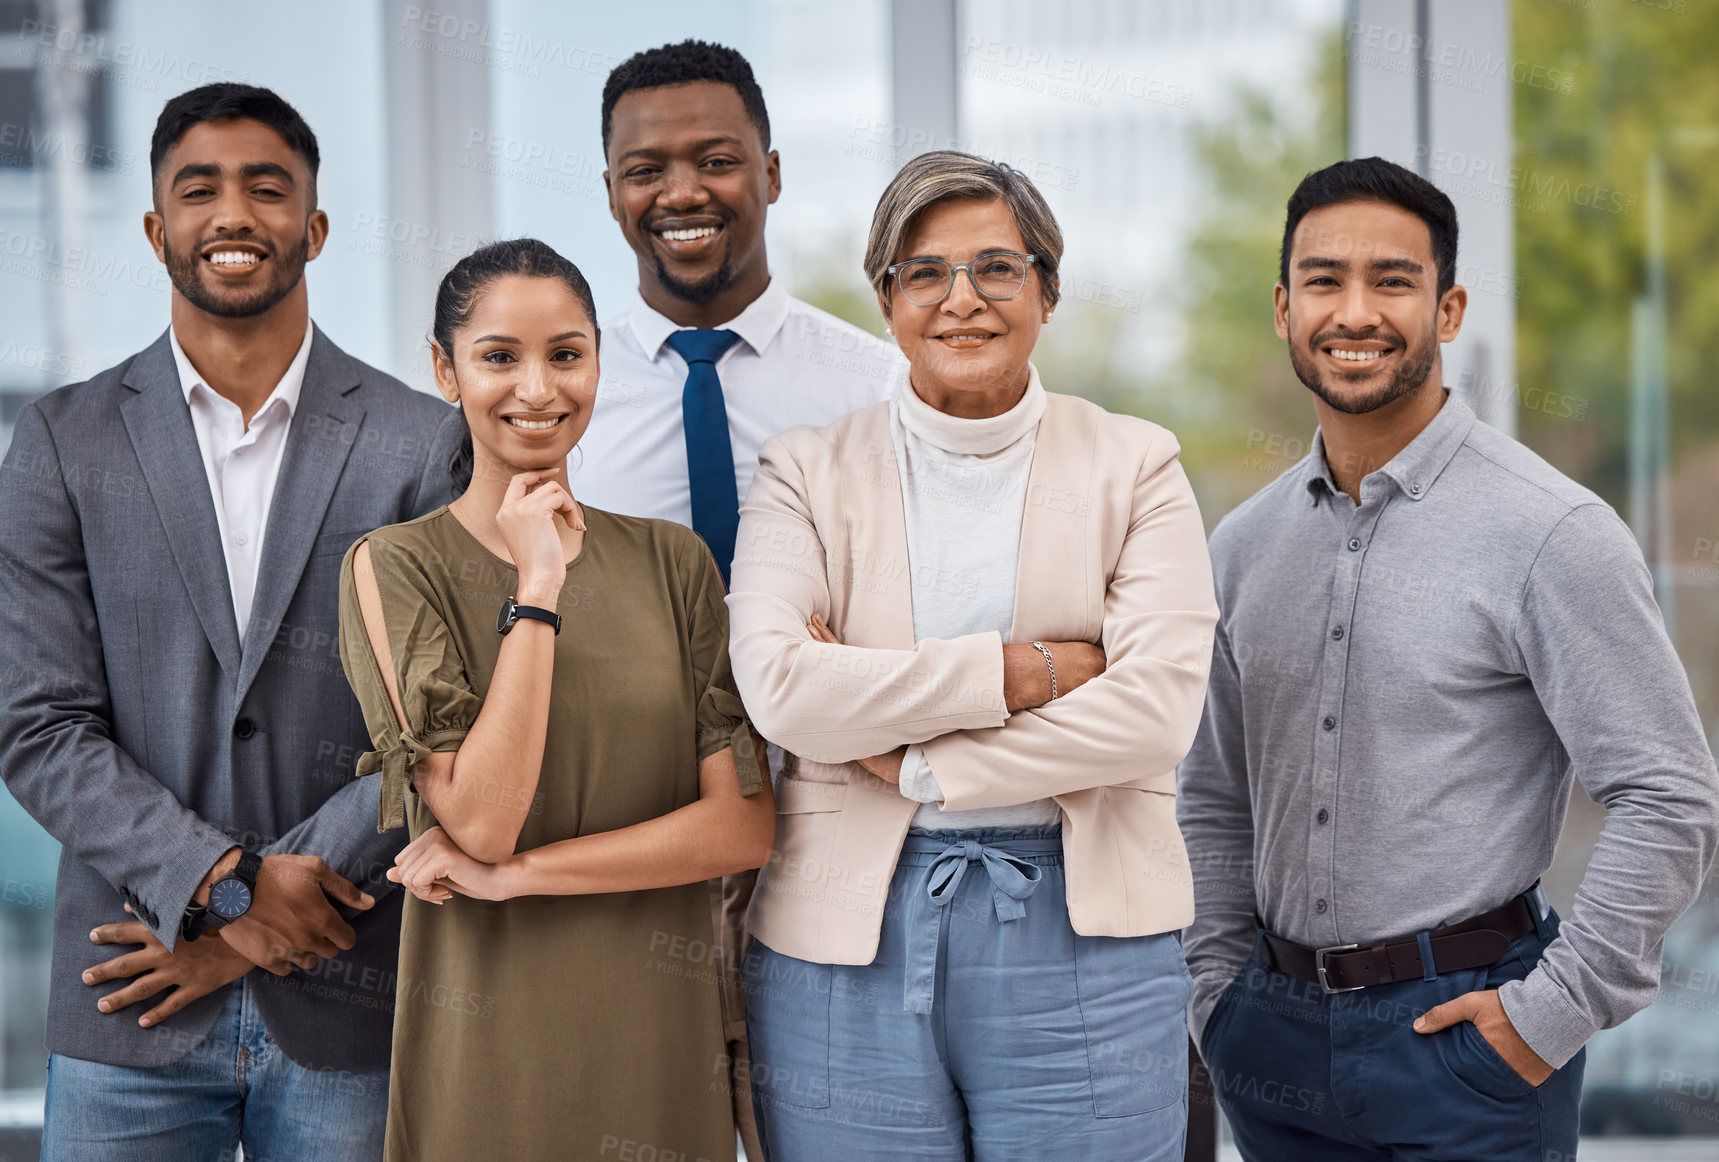 Buy stock photo Collaboration, smile and portrait of business people in the office with confidence and diversity. Happy, success and group of multiracial professional employees or team standing in workplace together